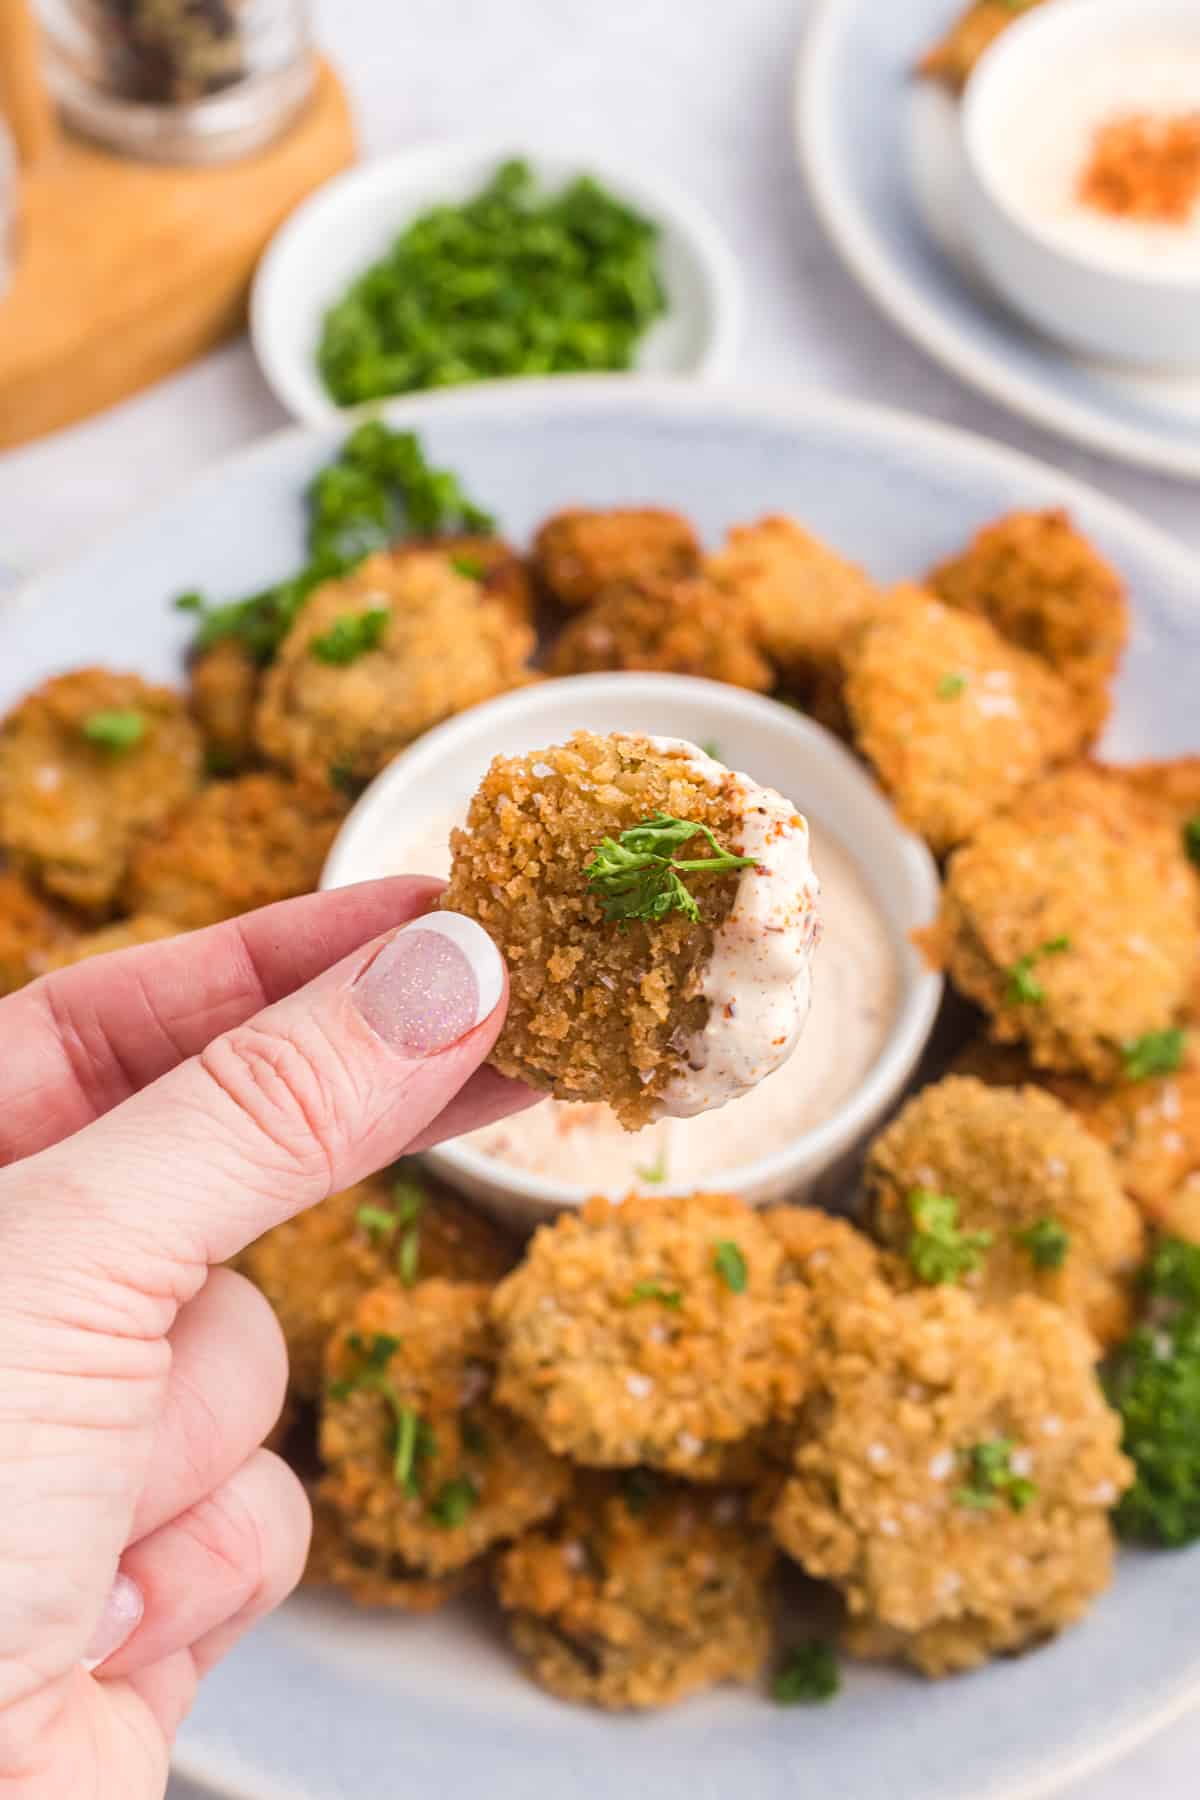 A fried pickle has been dipped in spicy remoulade sauce.